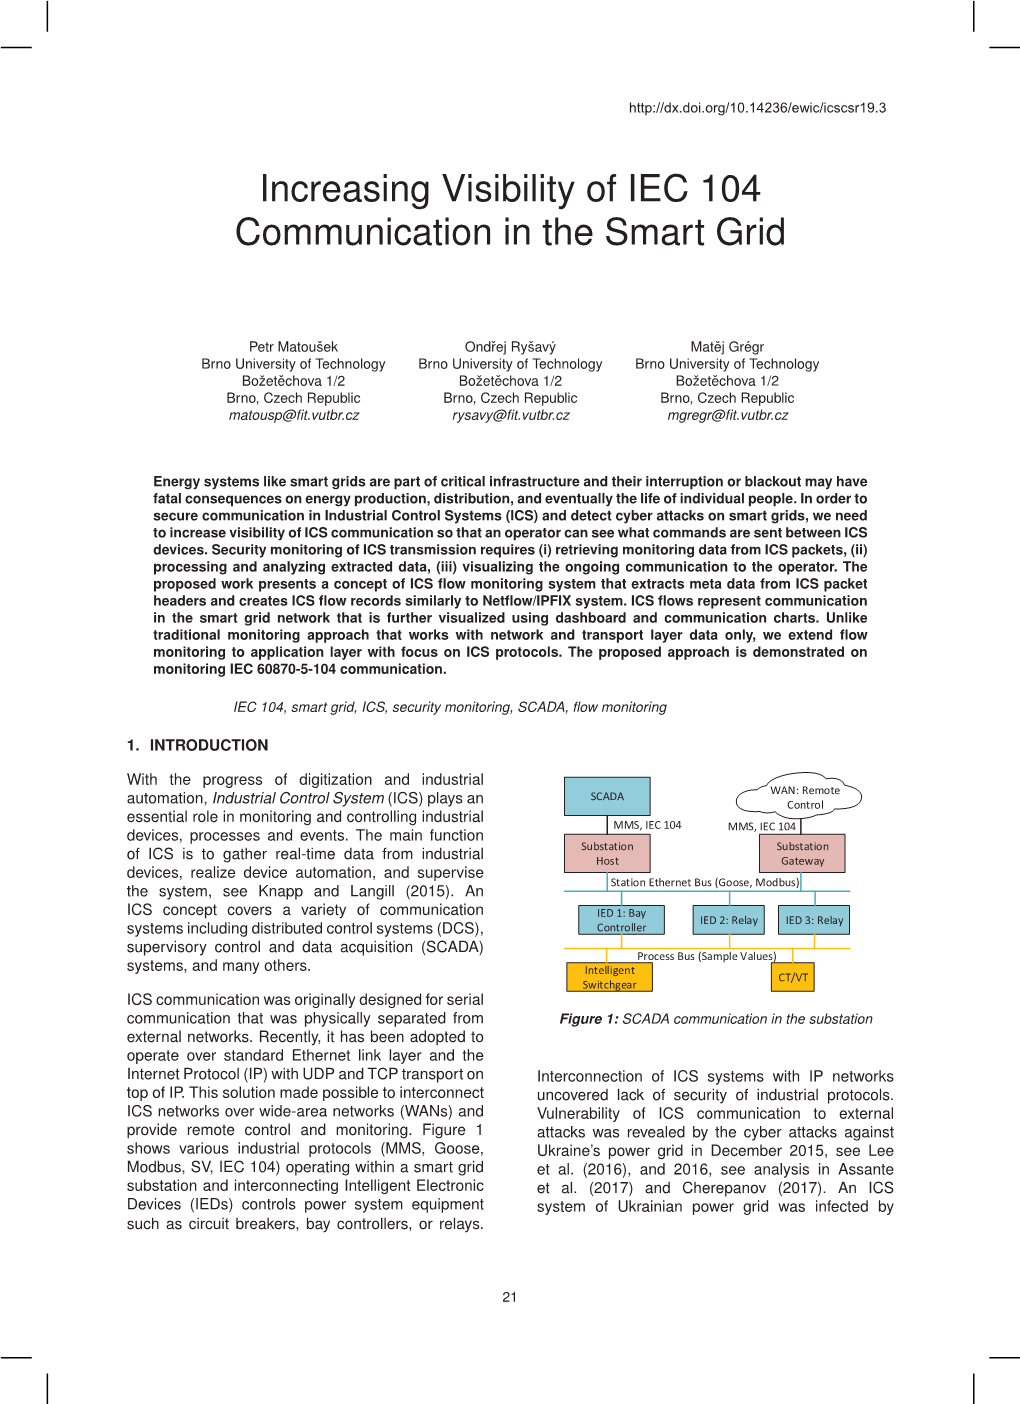 Increasing Visibility of IEC 104 Communication in the Smart Grid